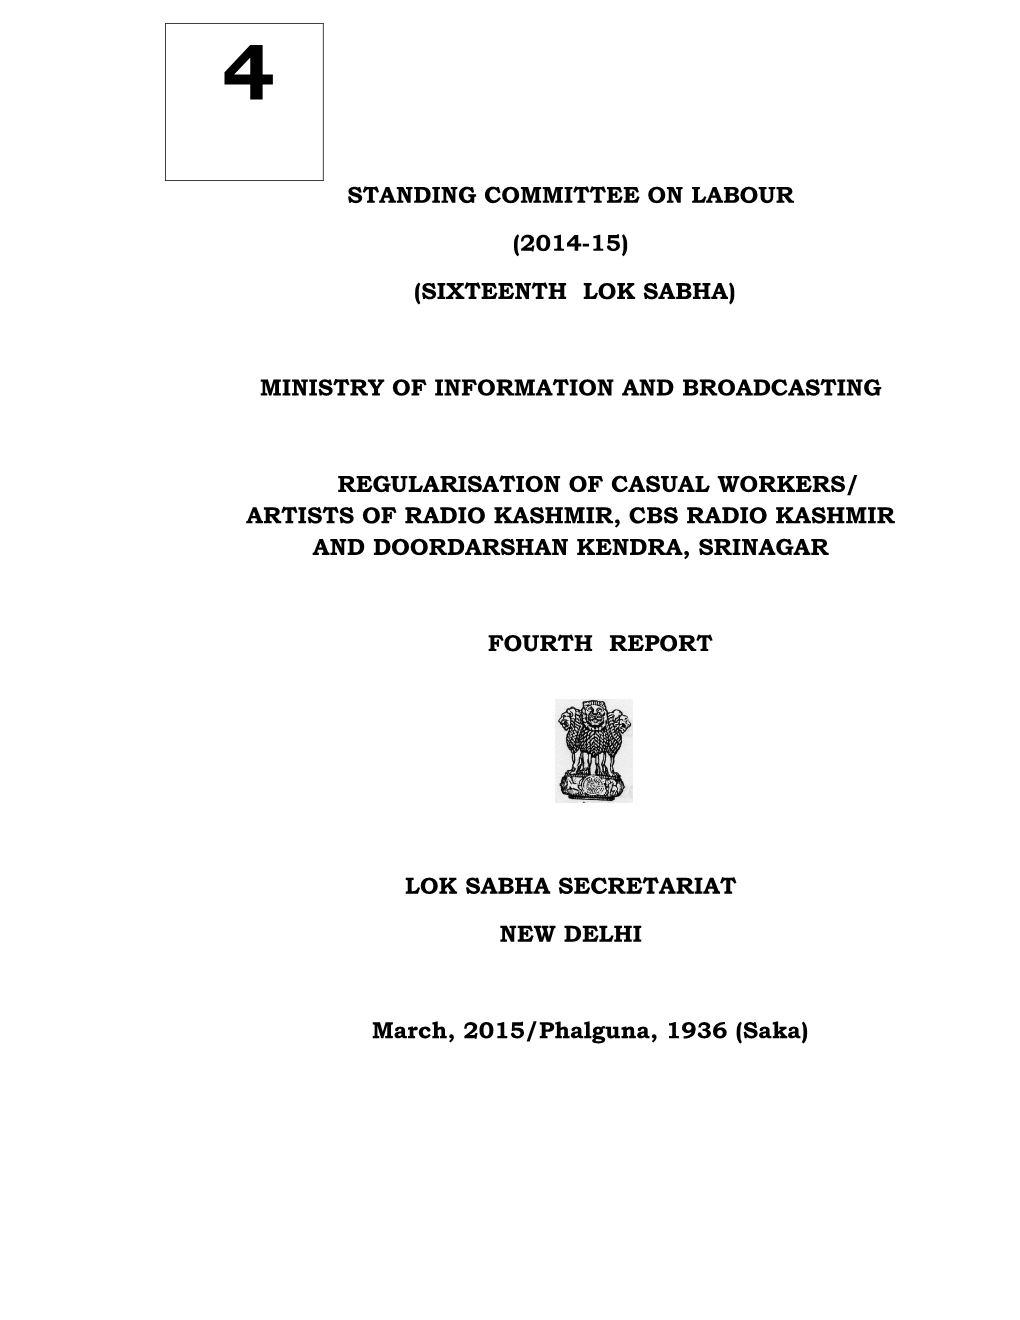 Standing Committee on Labour (2014-15)